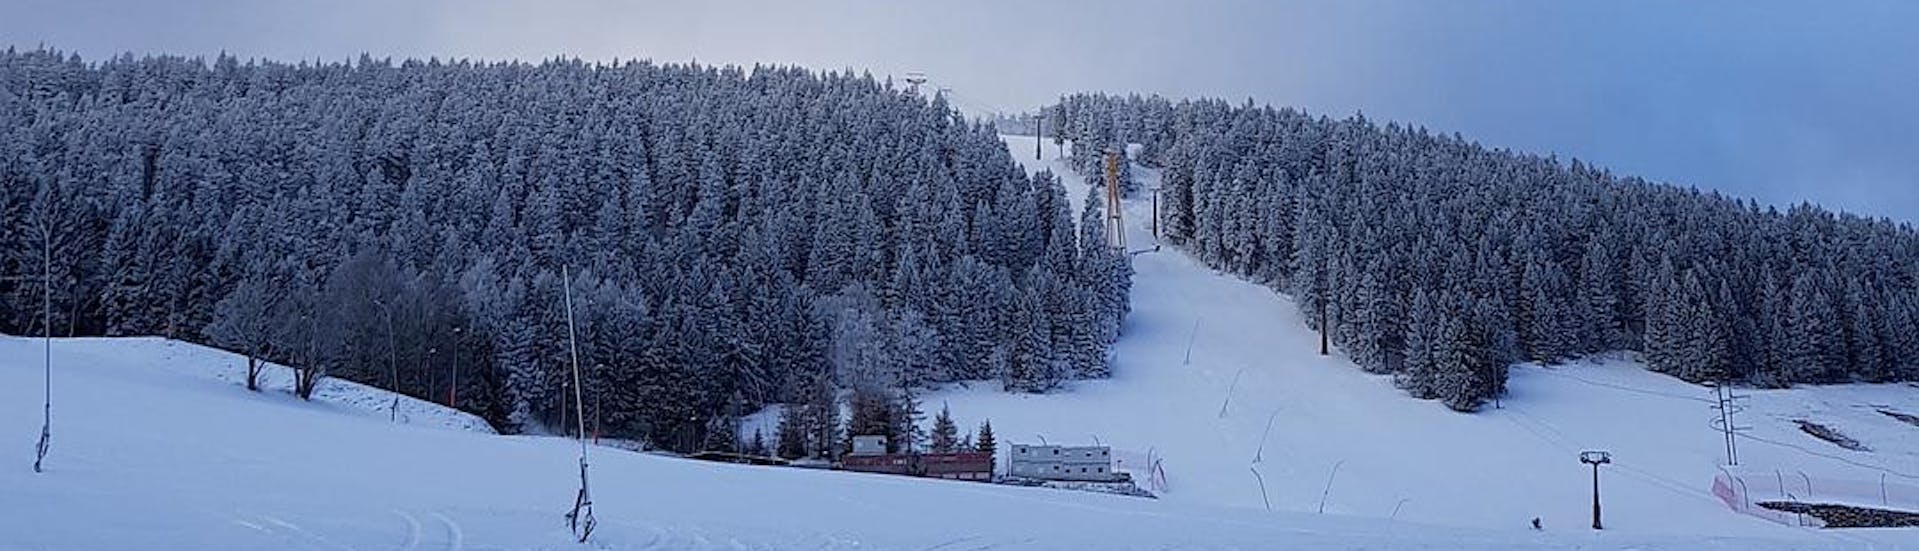 An image of the dreamy winter landscape in Fichtelberg-Oberwiesenthal, a German ski resort in which local ski schools offer a range of ski lessons to those who want to learn to ski.